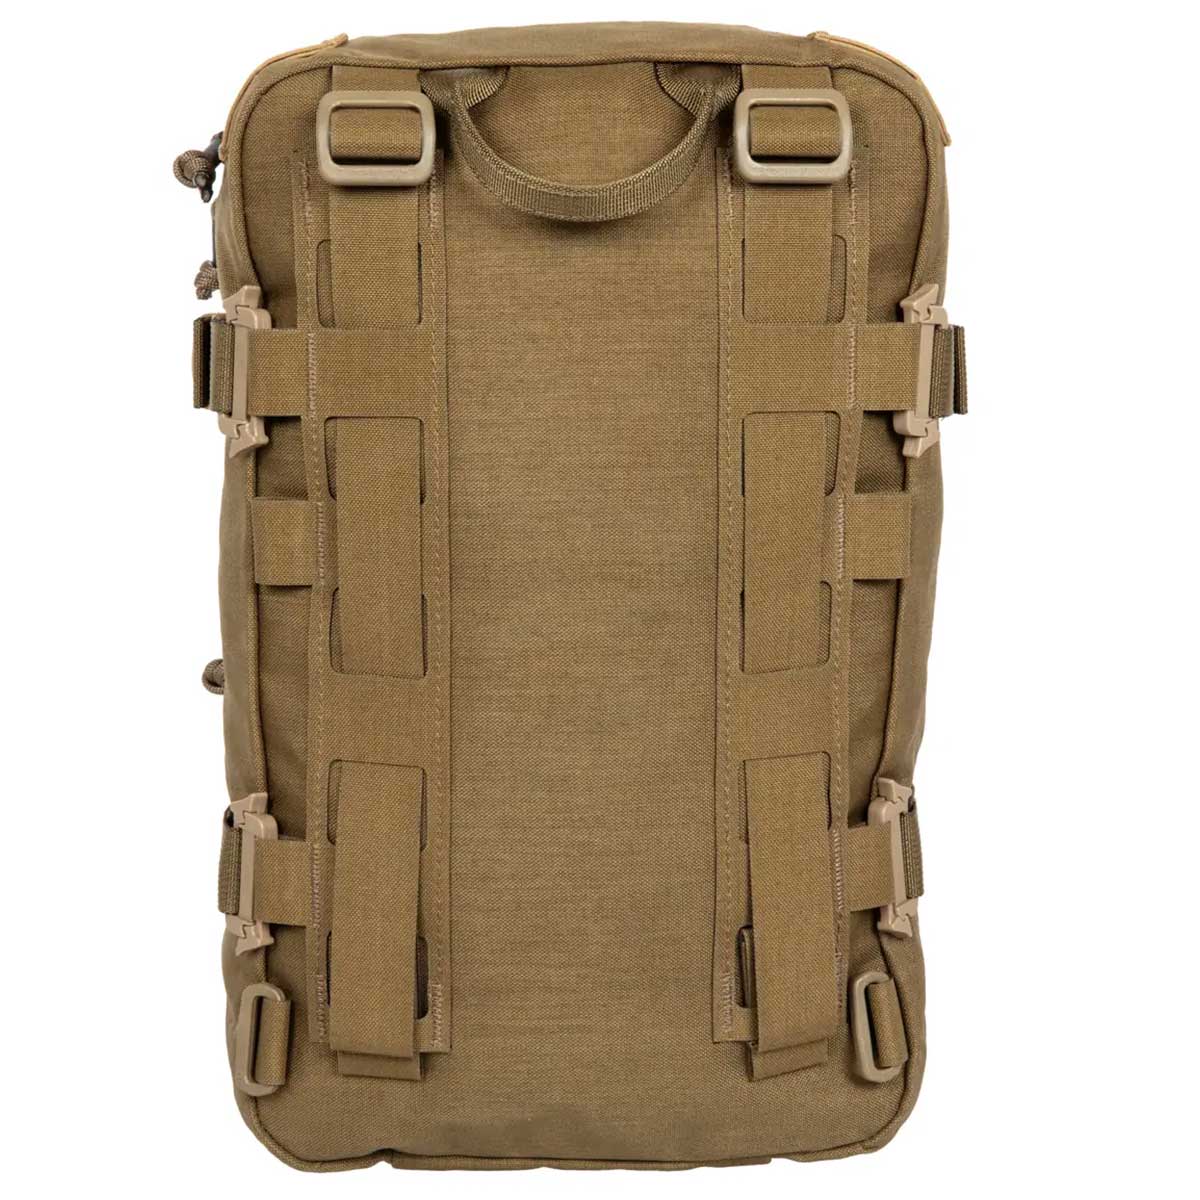 Рюкзак GTW Gear Advanced Pack - Coyote Brown